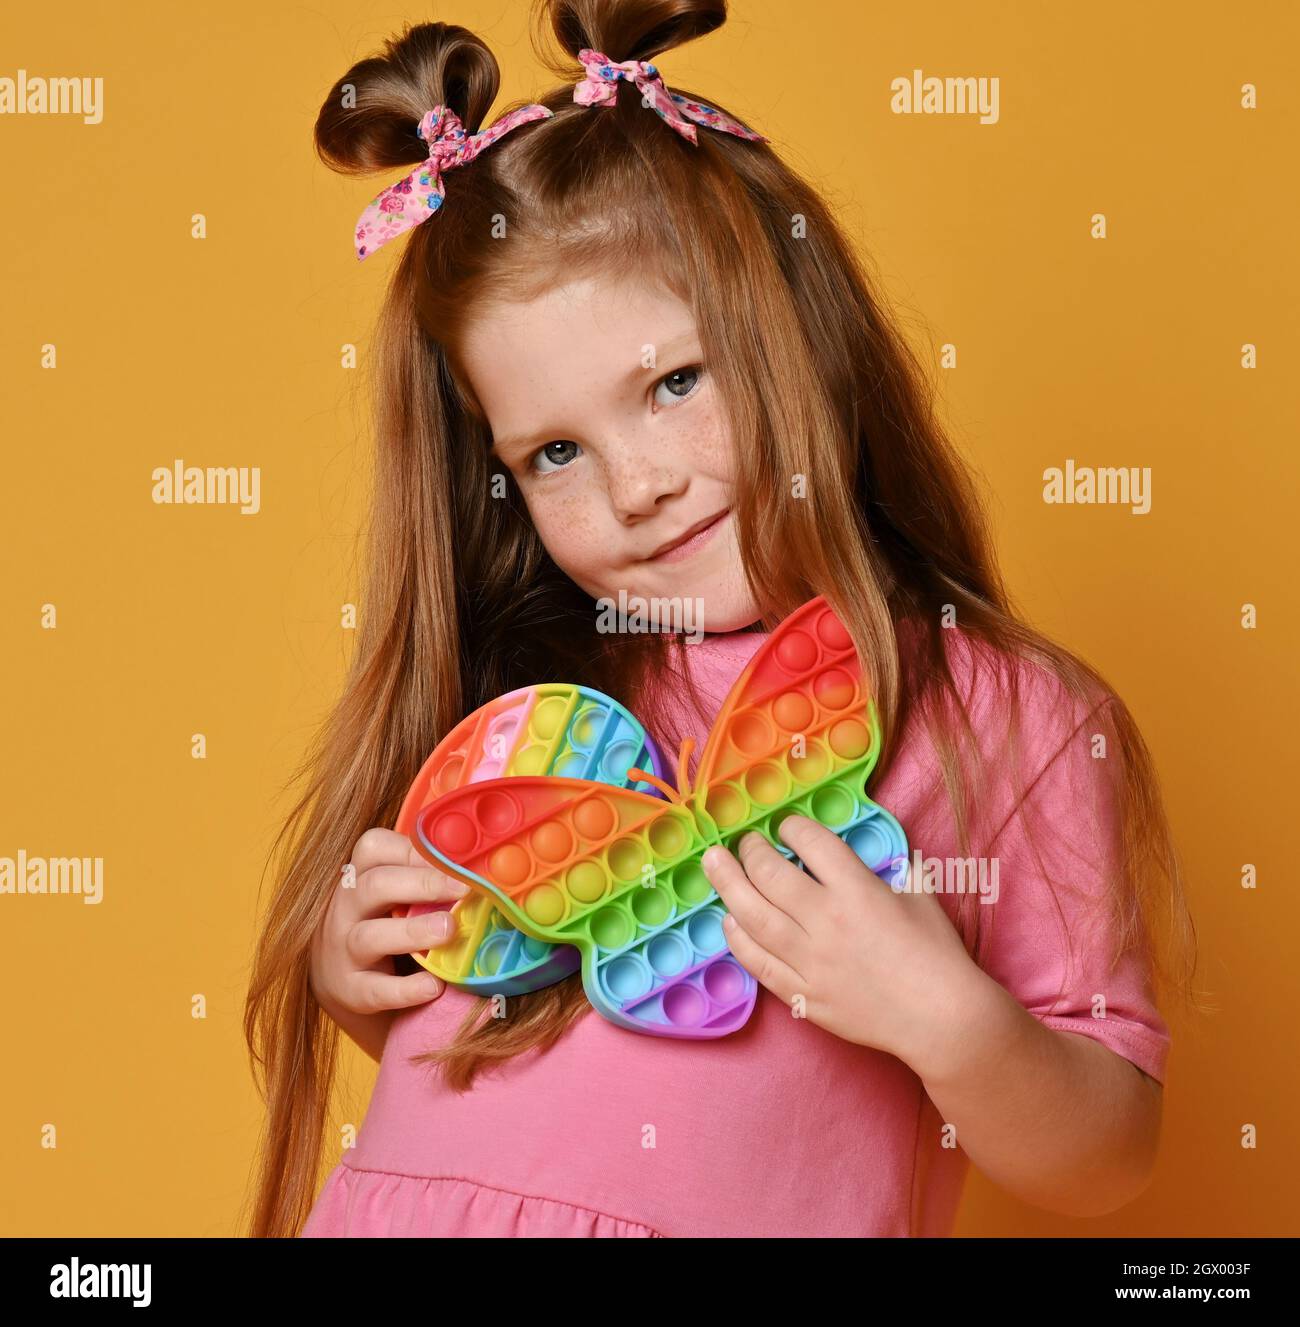 Red-haired kid girl in pink shirt stands hugging two new sensory rainbow color toys - butterfly shape and round pop it Stock Photo